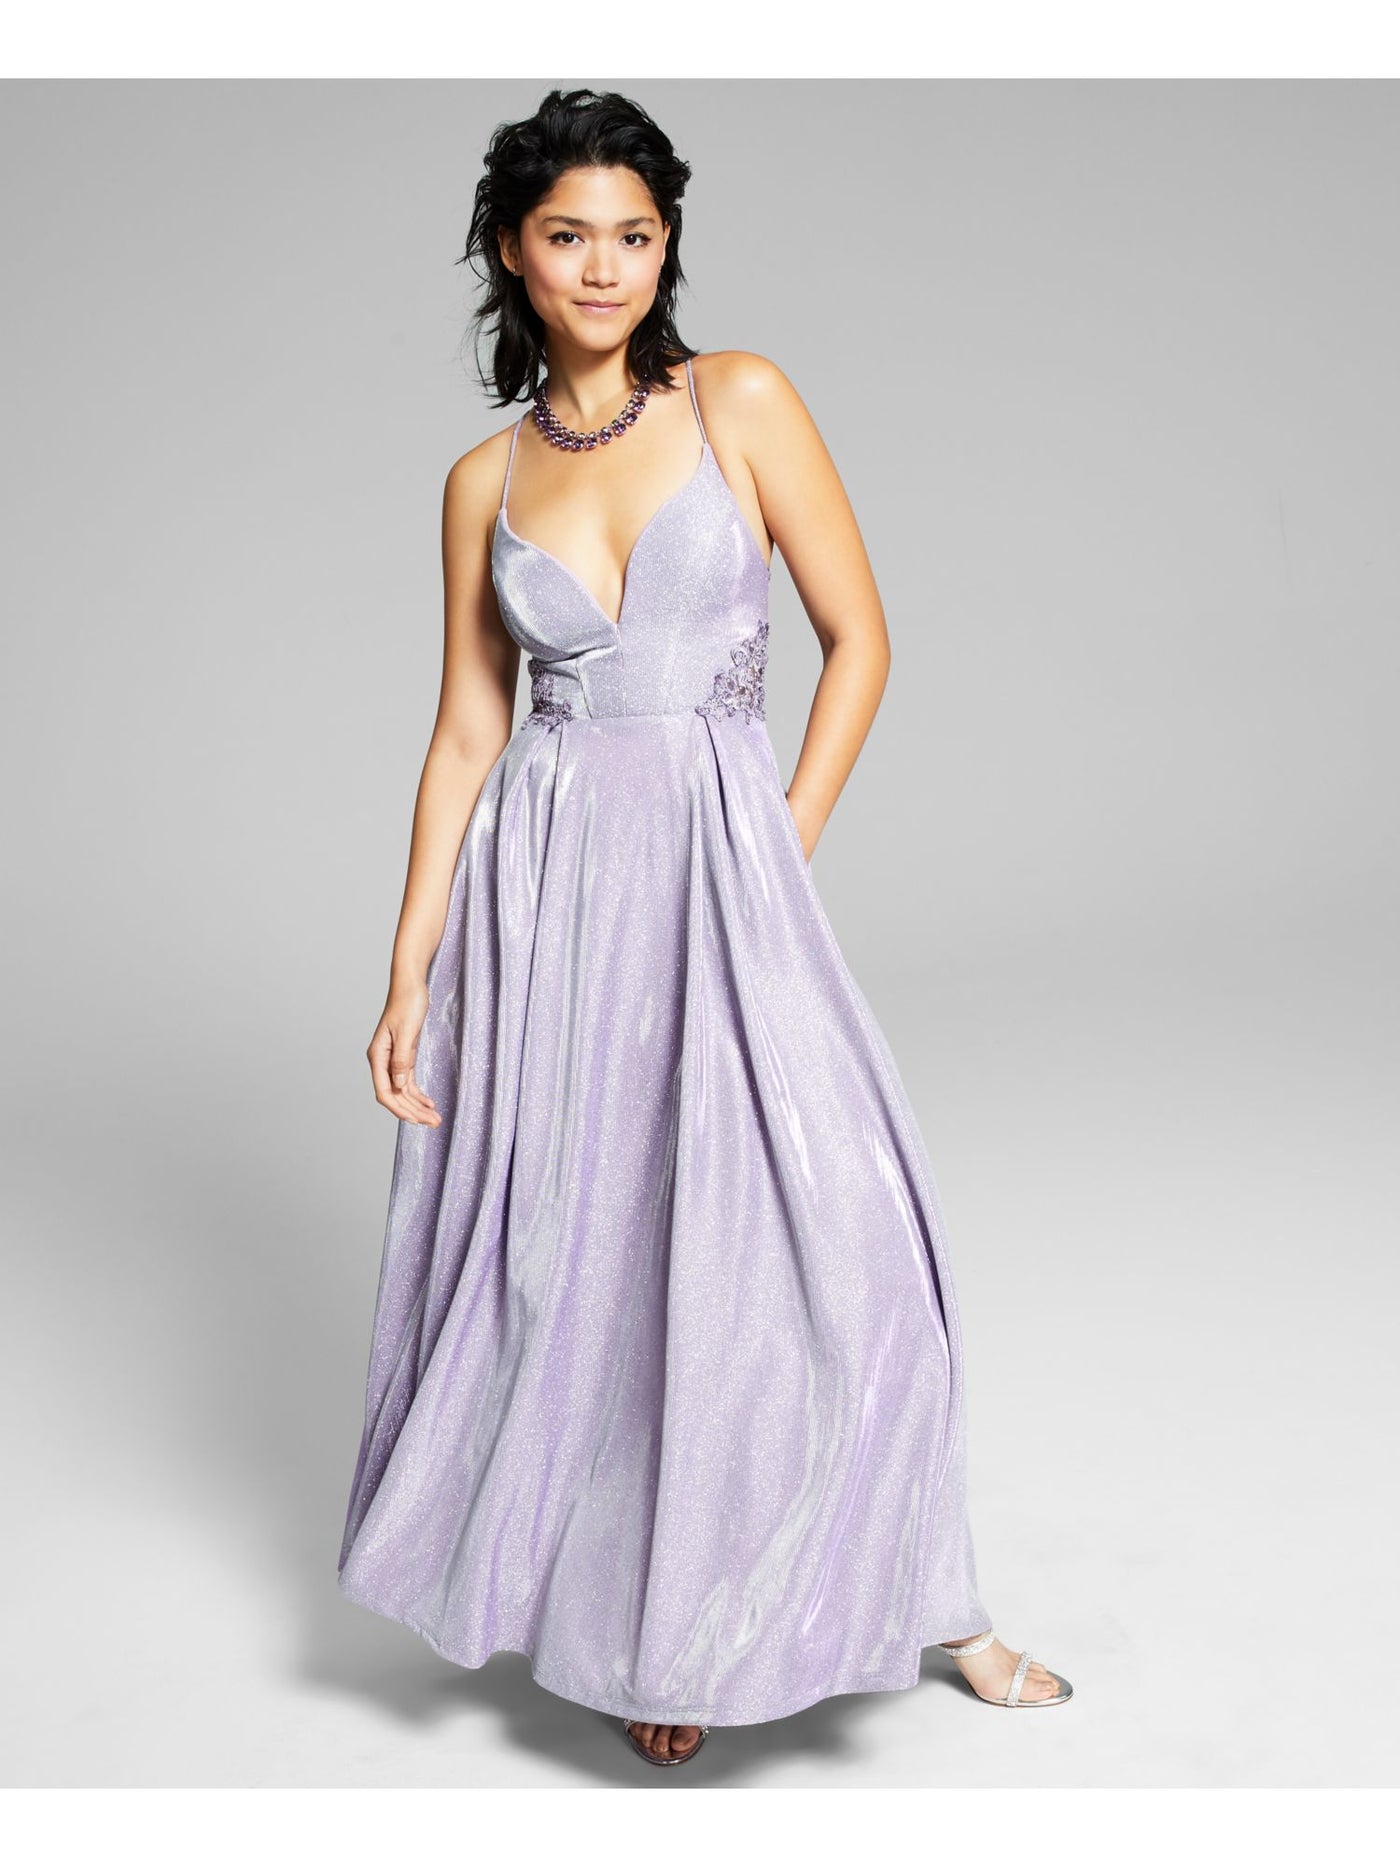 CITY STUDIO Womens Purple Pleated Zippered Plunging V-neck Lace-up Back Sleeveless Full-Length  Gown Prom Dress Juniors 9